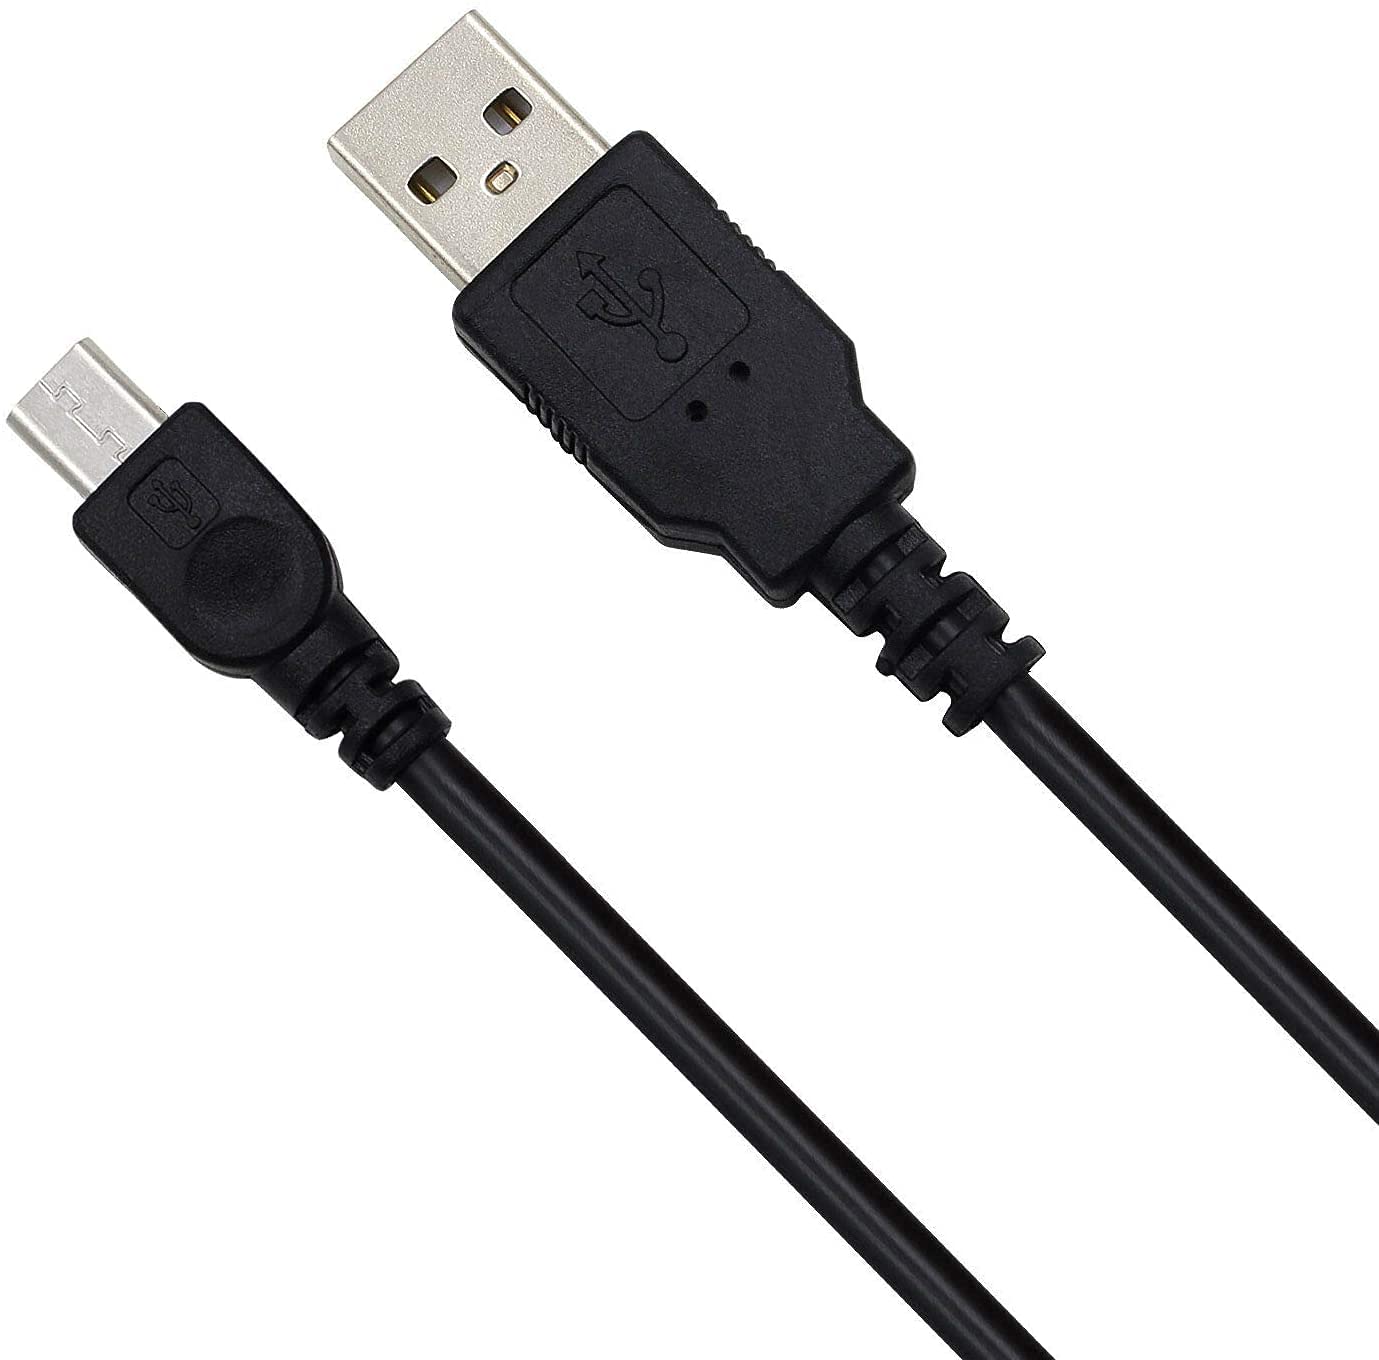 PPJ USB PC Sync Charger Cable Cord Lead for Sony Playstation 3 PS3 Controller Remote, Black